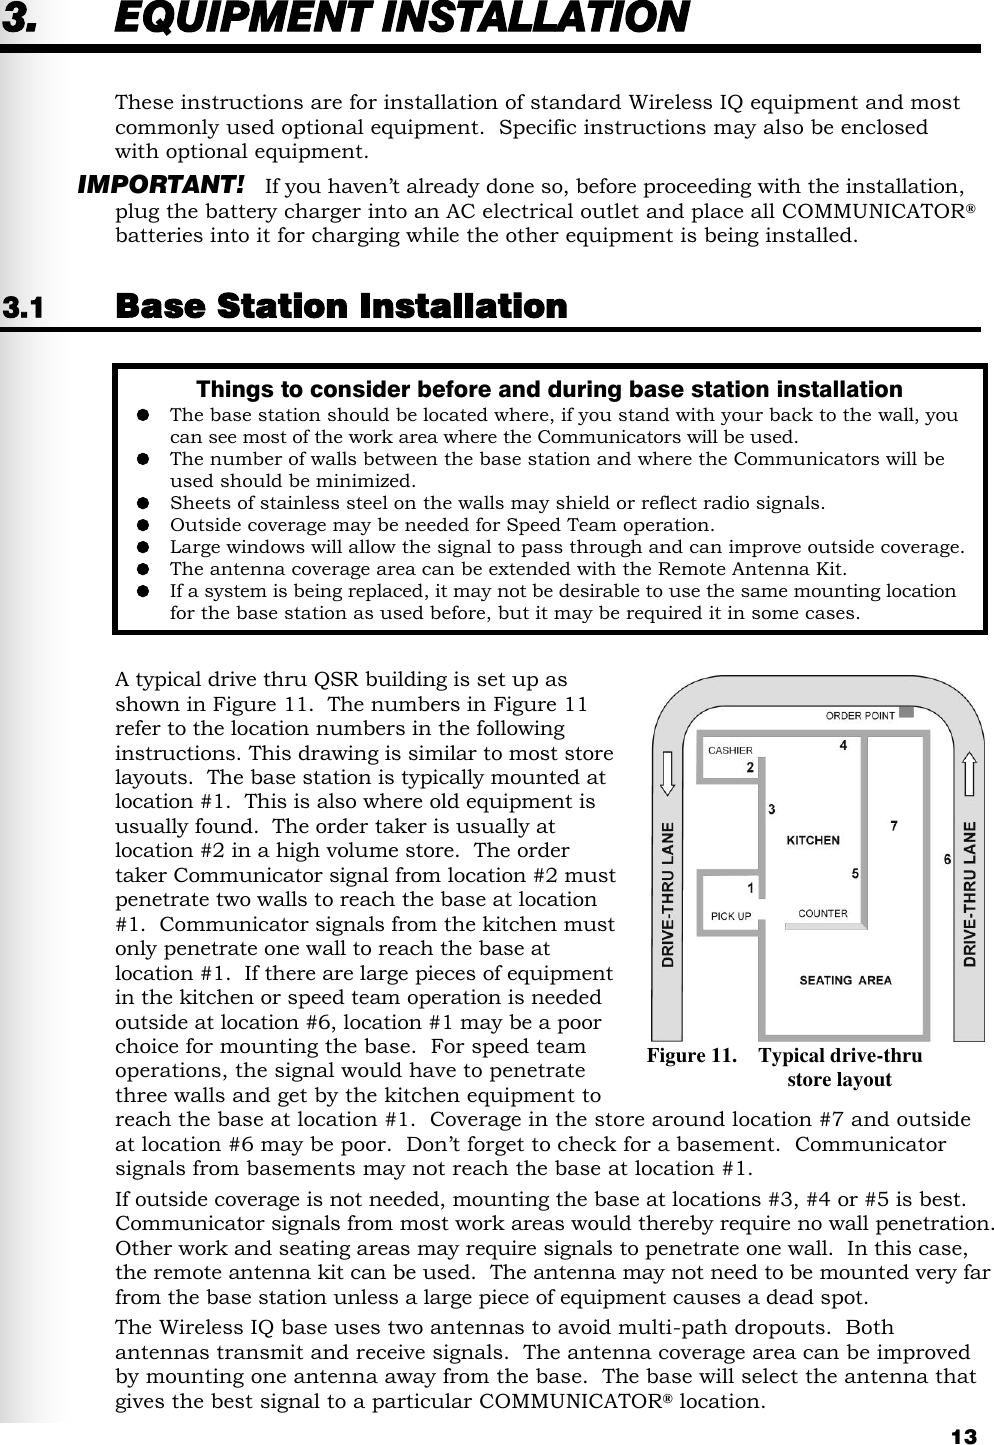   13 3. EQUIPMENT INSTALLATION These instructions are for installation of standard Wireless IQ equipment and most commonly used optional equipment.  Specific instructions may also be enclosed with optional equipment. IMPORTANT! If you haven’t already done so, before proceeding with the installation, plug the battery charger into an AC electrical outlet and place all COMMUNICATOR® batteries into it for charging while the other equipment is being installed. 3.1 Base Station Installation  A typical drive thru QSR building is set up as shown in Figure 11.  The numbers in Figure 11 refer to the location numbers in the following instructions. This drawing is similar to most store layouts.  The base station is typically mounted at location #1.  This is also where old equipment is usually found.  The order taker is usually at location #2 in a high volume store.  The order  taker Communicator signal from location #2 must penetrate two walls to reach the base at location #1.  Communicator signals from the kitchen must only penetrate one wall to reach the base at location #1.  If there are large pieces of equipment in the kitchen or speed team operation is needed outside at location #6, location #1 may be a poor choice for mounting the base.  For speed team operations, the signal would have to penetrate three walls and get by the kitchen equipment to reach the base at location #1.  Coverage in the store around location #7 and outside at location #6 may be poor.  Don’t forget to check for a basement.  Communicator signals from basements may not reach the base at location #1. If outside coverage is not needed, mounting the base at locations #3, #4 or #5 is best.  Communicator signals from most work areas would thereby require no wall penetration.  Other work and seating areas may require signals to penetrate one wall.  In this case, the remote antenna kit can be used.  The antenna may not need to be mounted very far from the base station unless a large piece of equipment causes a dead spot. The Wireless IQ base uses two antennas to avoid multi-path dropouts.  Both antennas transmit and receive signals.  The antenna coverage area can be improved by mounting one antenna away from the base.  The base will select the antenna that gives the best signal to a particular COMMUNICATOR® location.  Things to consider before and during base station installation  The base station should be located where, if you stand with your back to the wall, you can see most of the work area where the Communicators will be used.  The number of walls between the base station and where the Communicators will be used should be minimized.  Sheets of stainless steel on the walls may shield or reflect radio signals.  Outside coverage may be needed for Speed Team operation.   Large windows will allow the signal to pass through and can improve outside coverage.   The antenna coverage area can be extended with the Remote Antenna Kit.  If a system is being replaced, it may not be desirable to use the same mounting location for the base station as used before, but it may be required it in some cases.    Figure 11.    Typical drive-thru                             store layout 